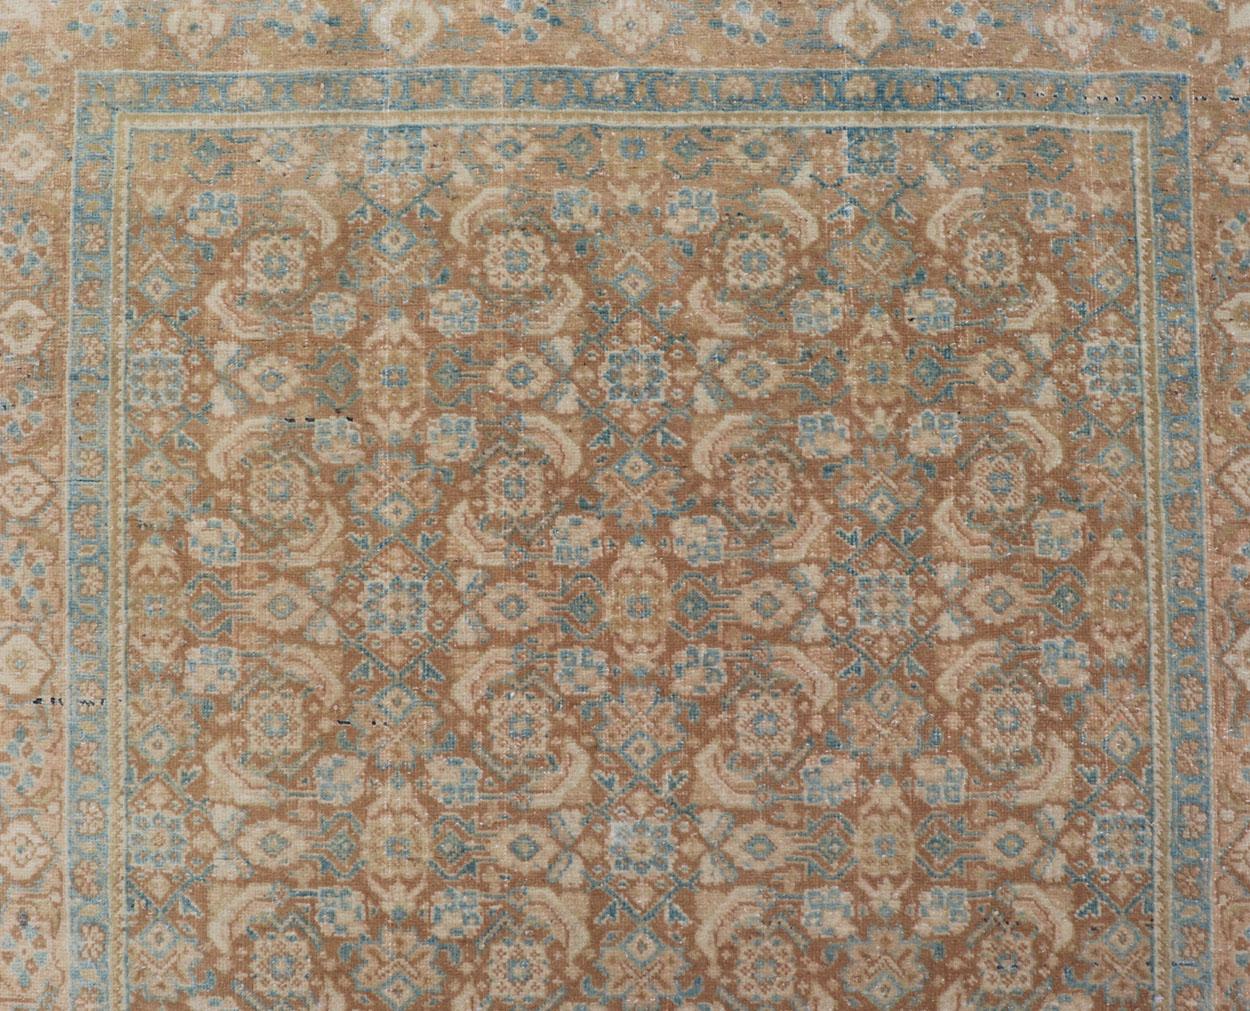 Vintage Persian Tabriz Runner with All-Over Floral Design in Tan and Blue For Sale 3